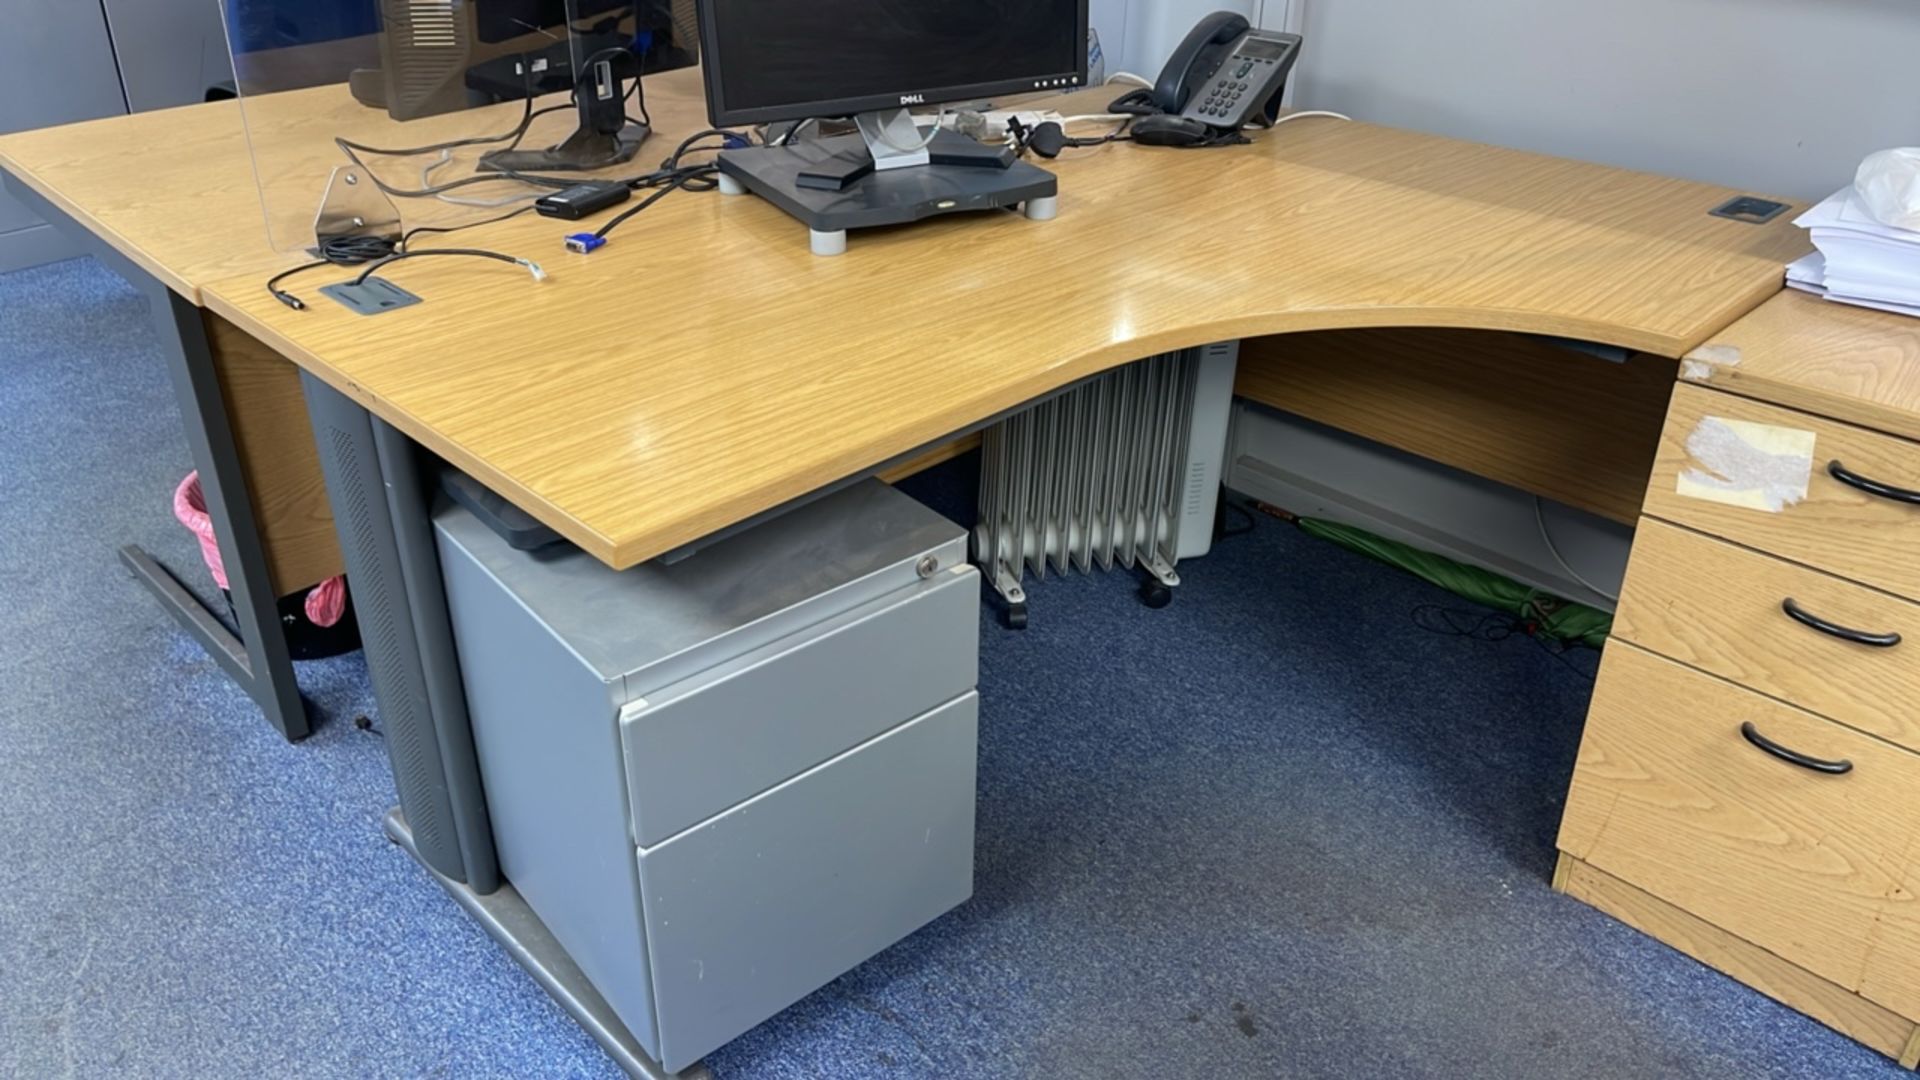 Bank Of 4 Desks, Chairs & Drawers - Image 2 of 18